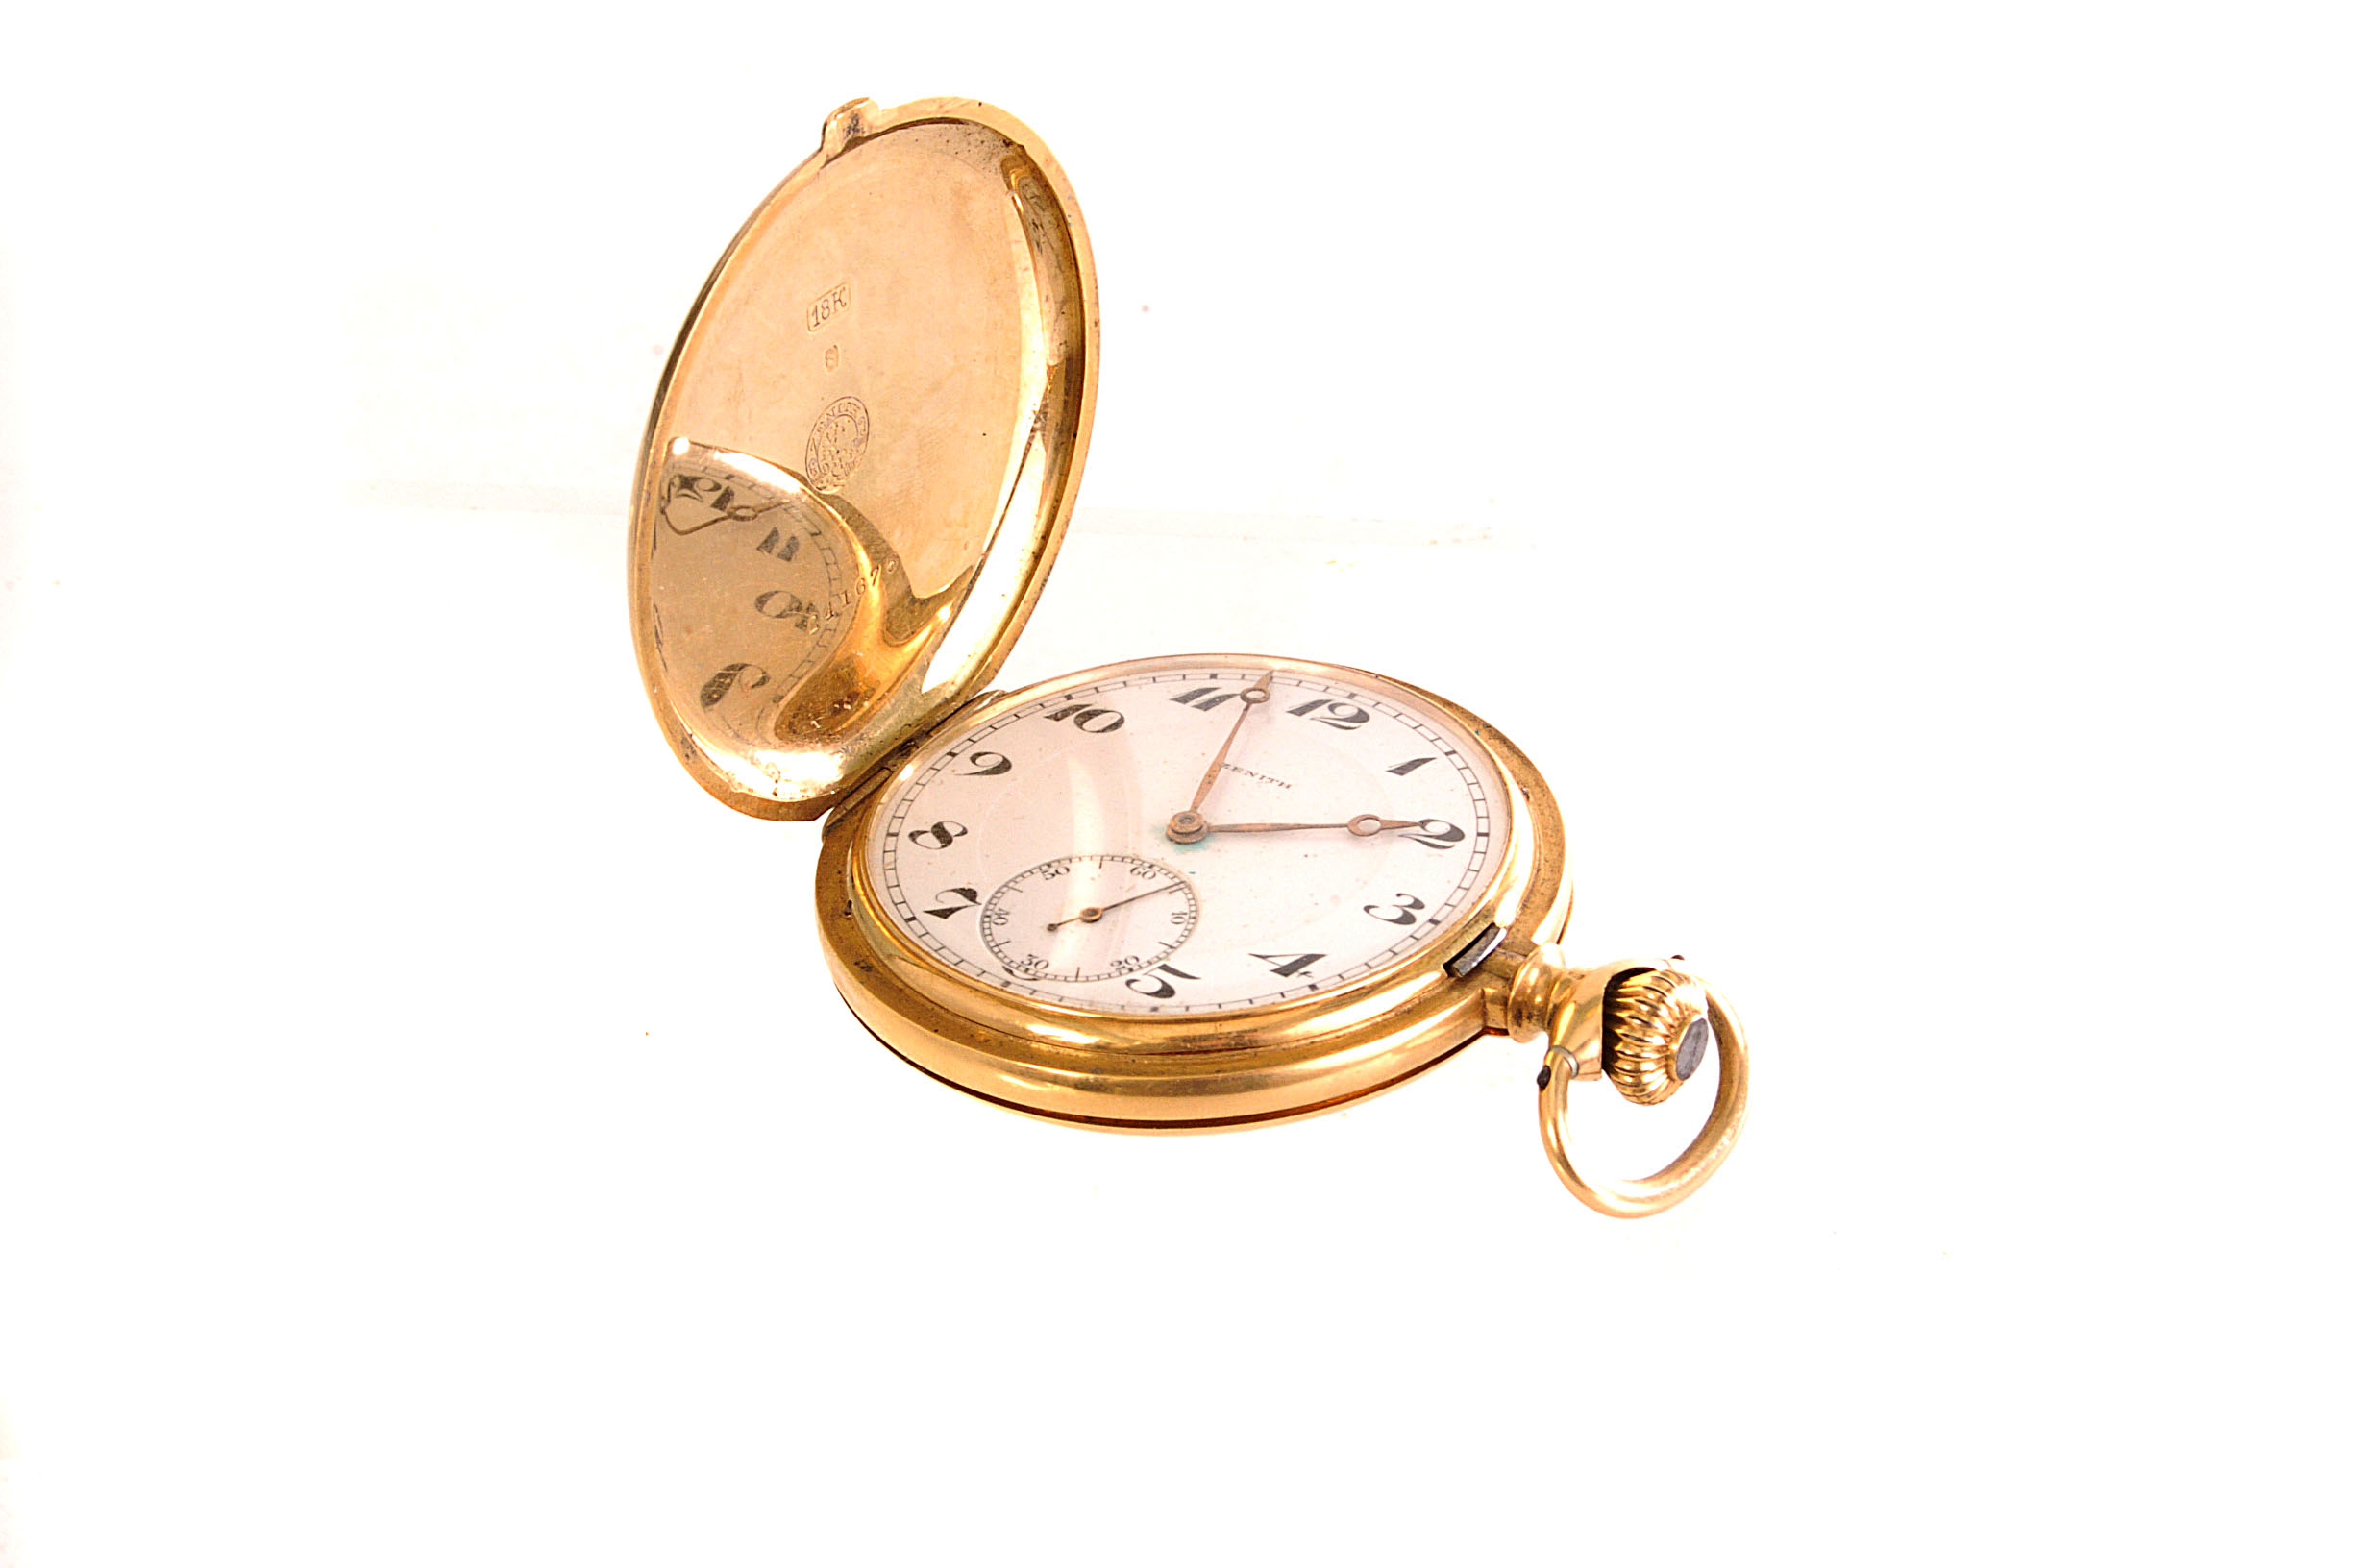 An 18ct gold hunter pocket watch by Zenith, having black Arabic numerals and subsidiary dial on